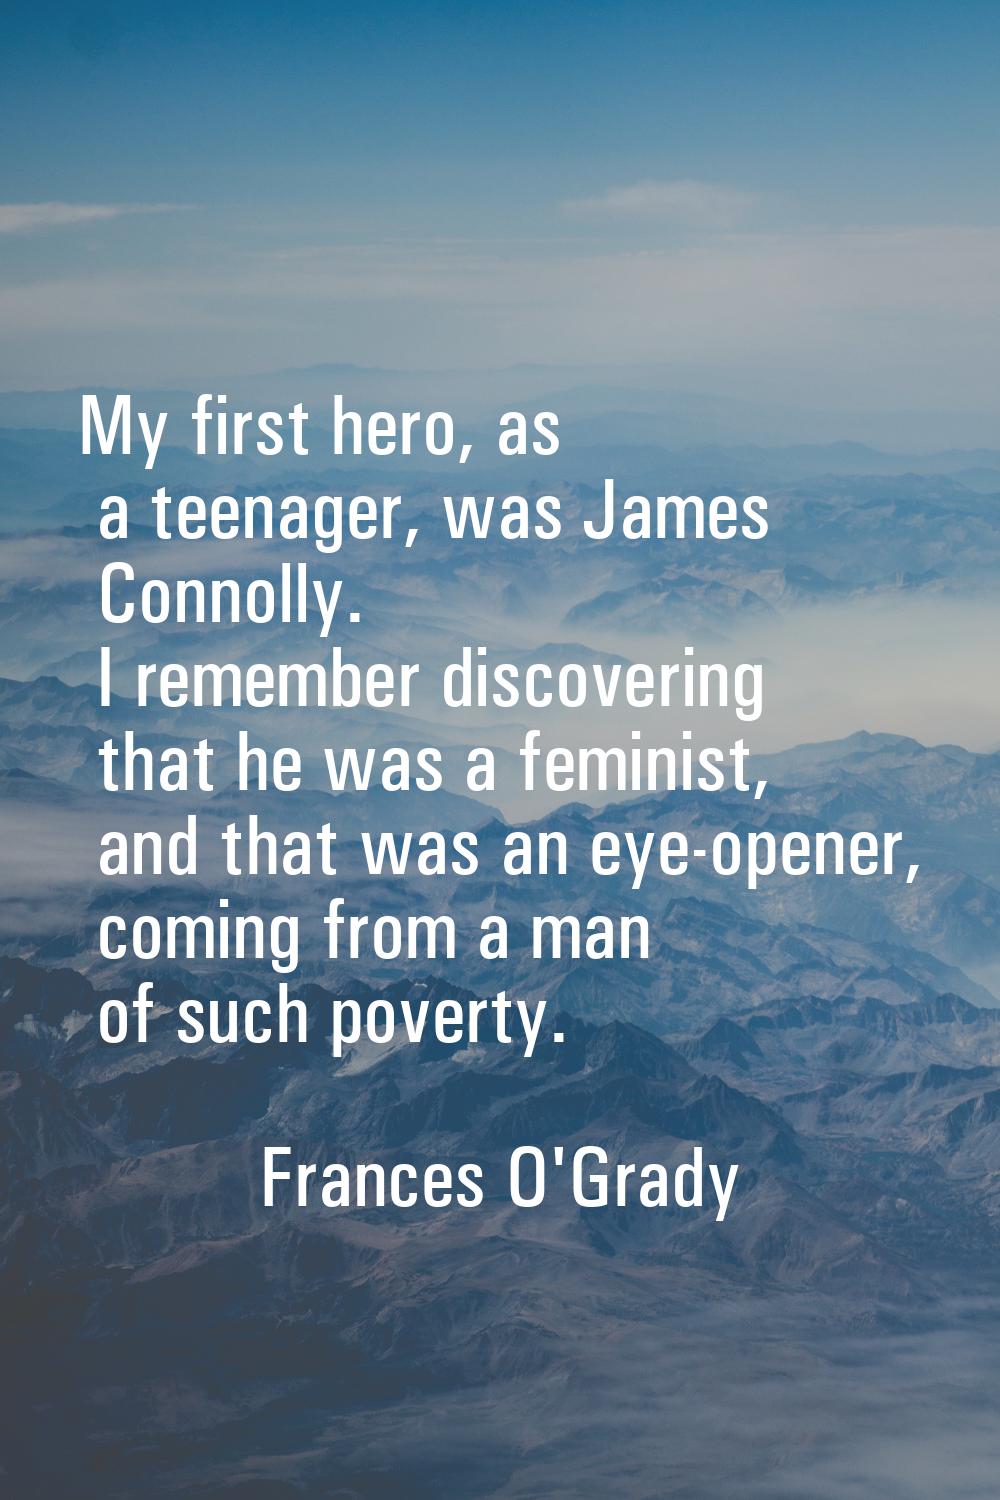 My first hero, as a teenager, was James Connolly. I remember discovering that he was a feminist, an